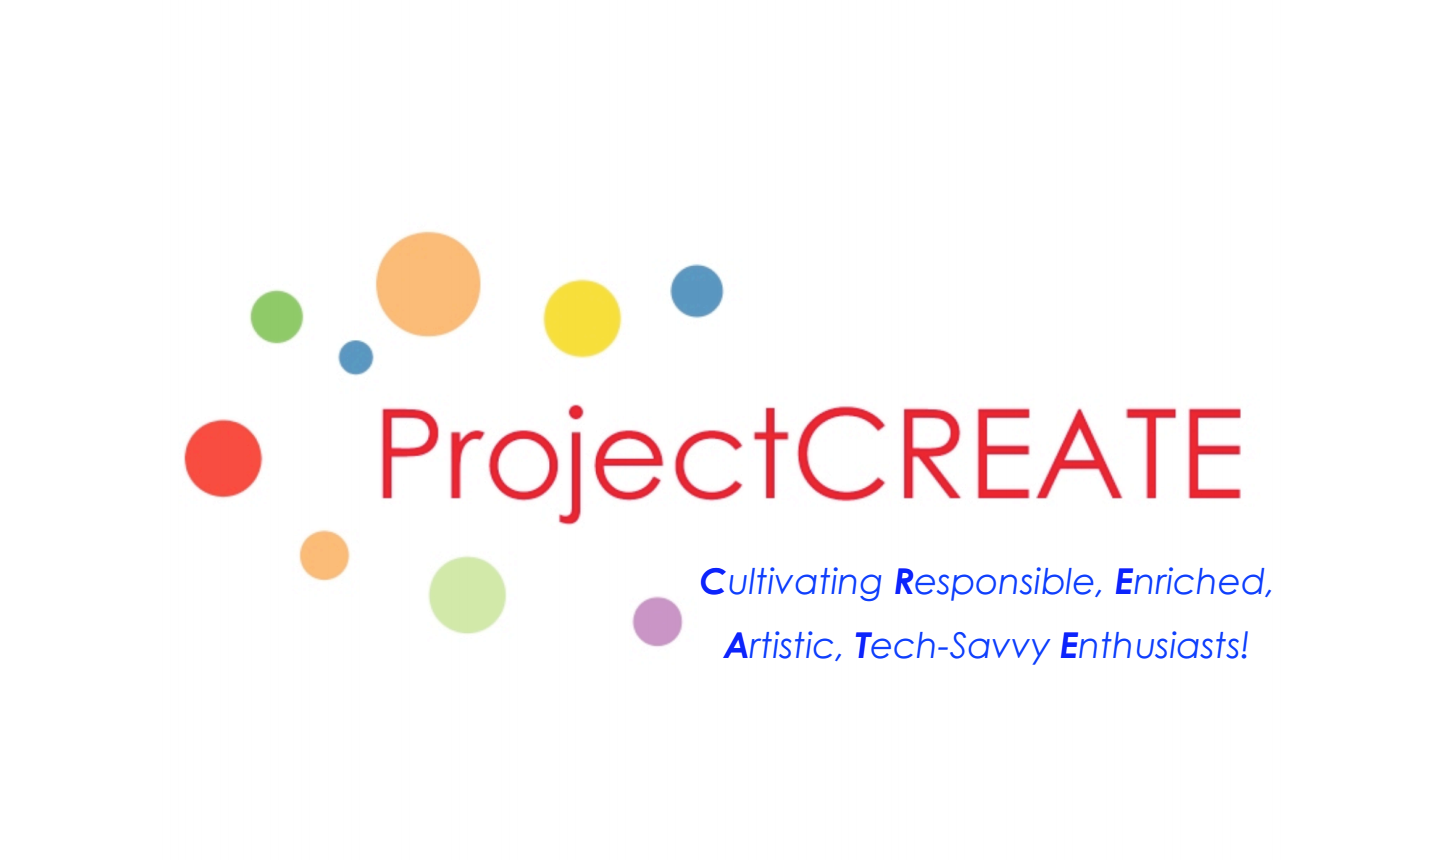 ProjectCREATE Summer Camp: Overcoming Obstacles 